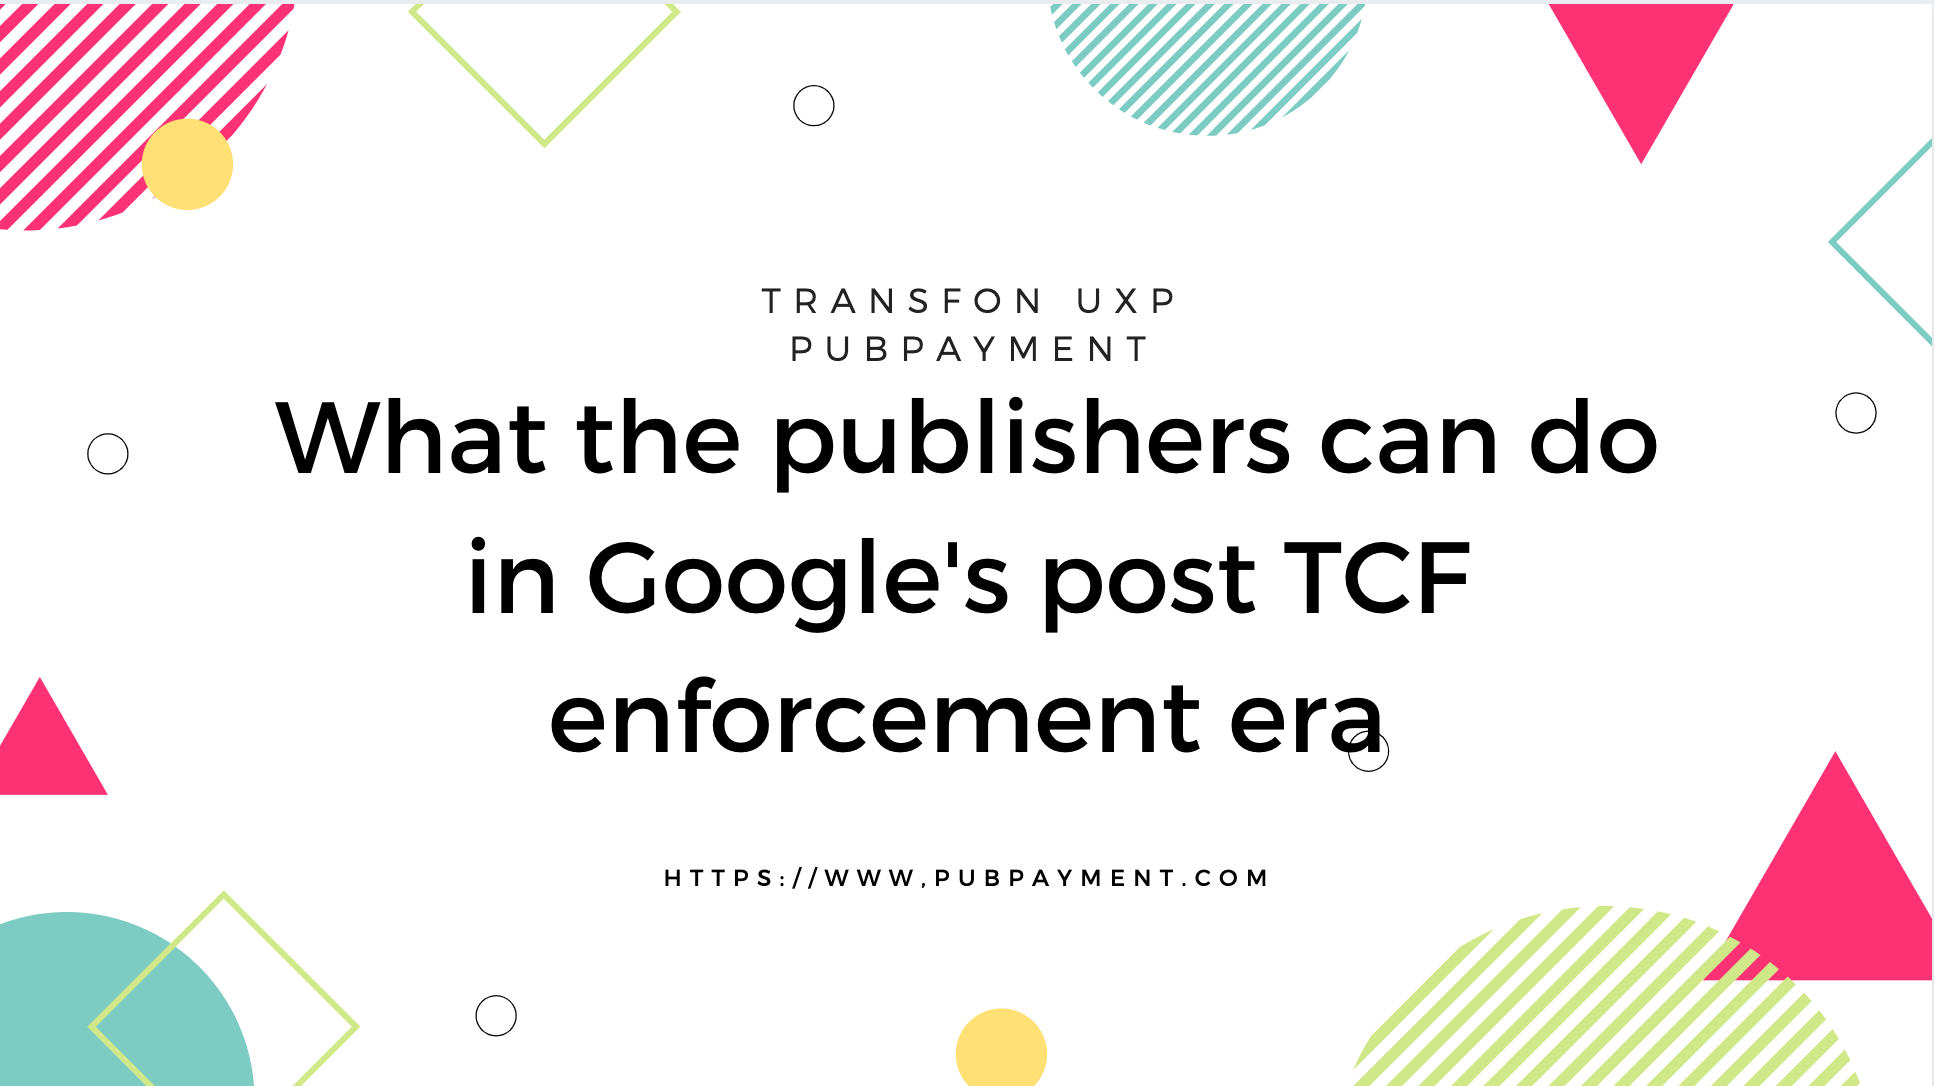 What to do in Google's post-TCF enforcement era